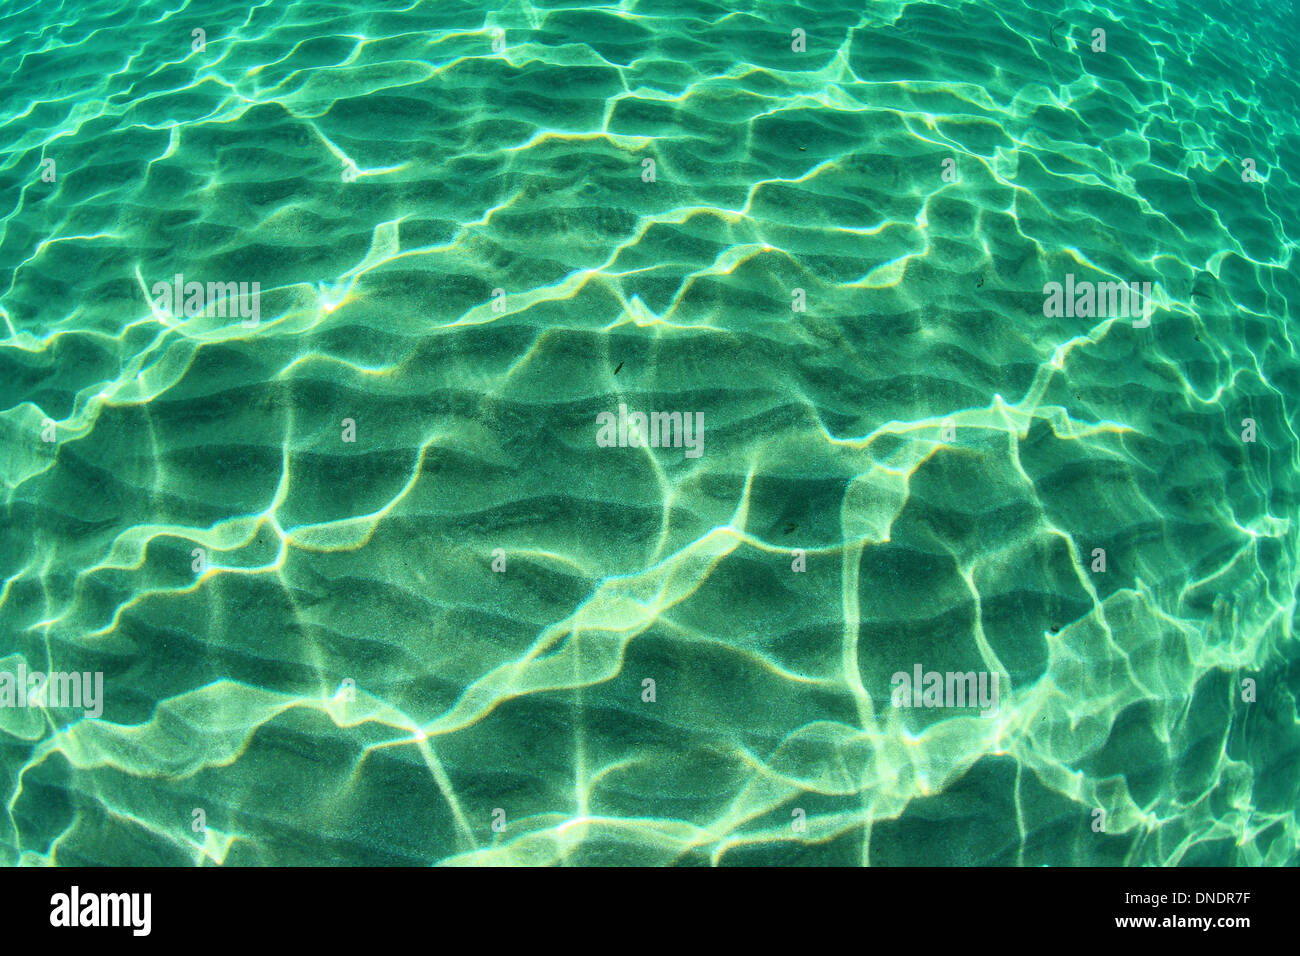 the clear warm seawater incite discover the marine world Stock Photo